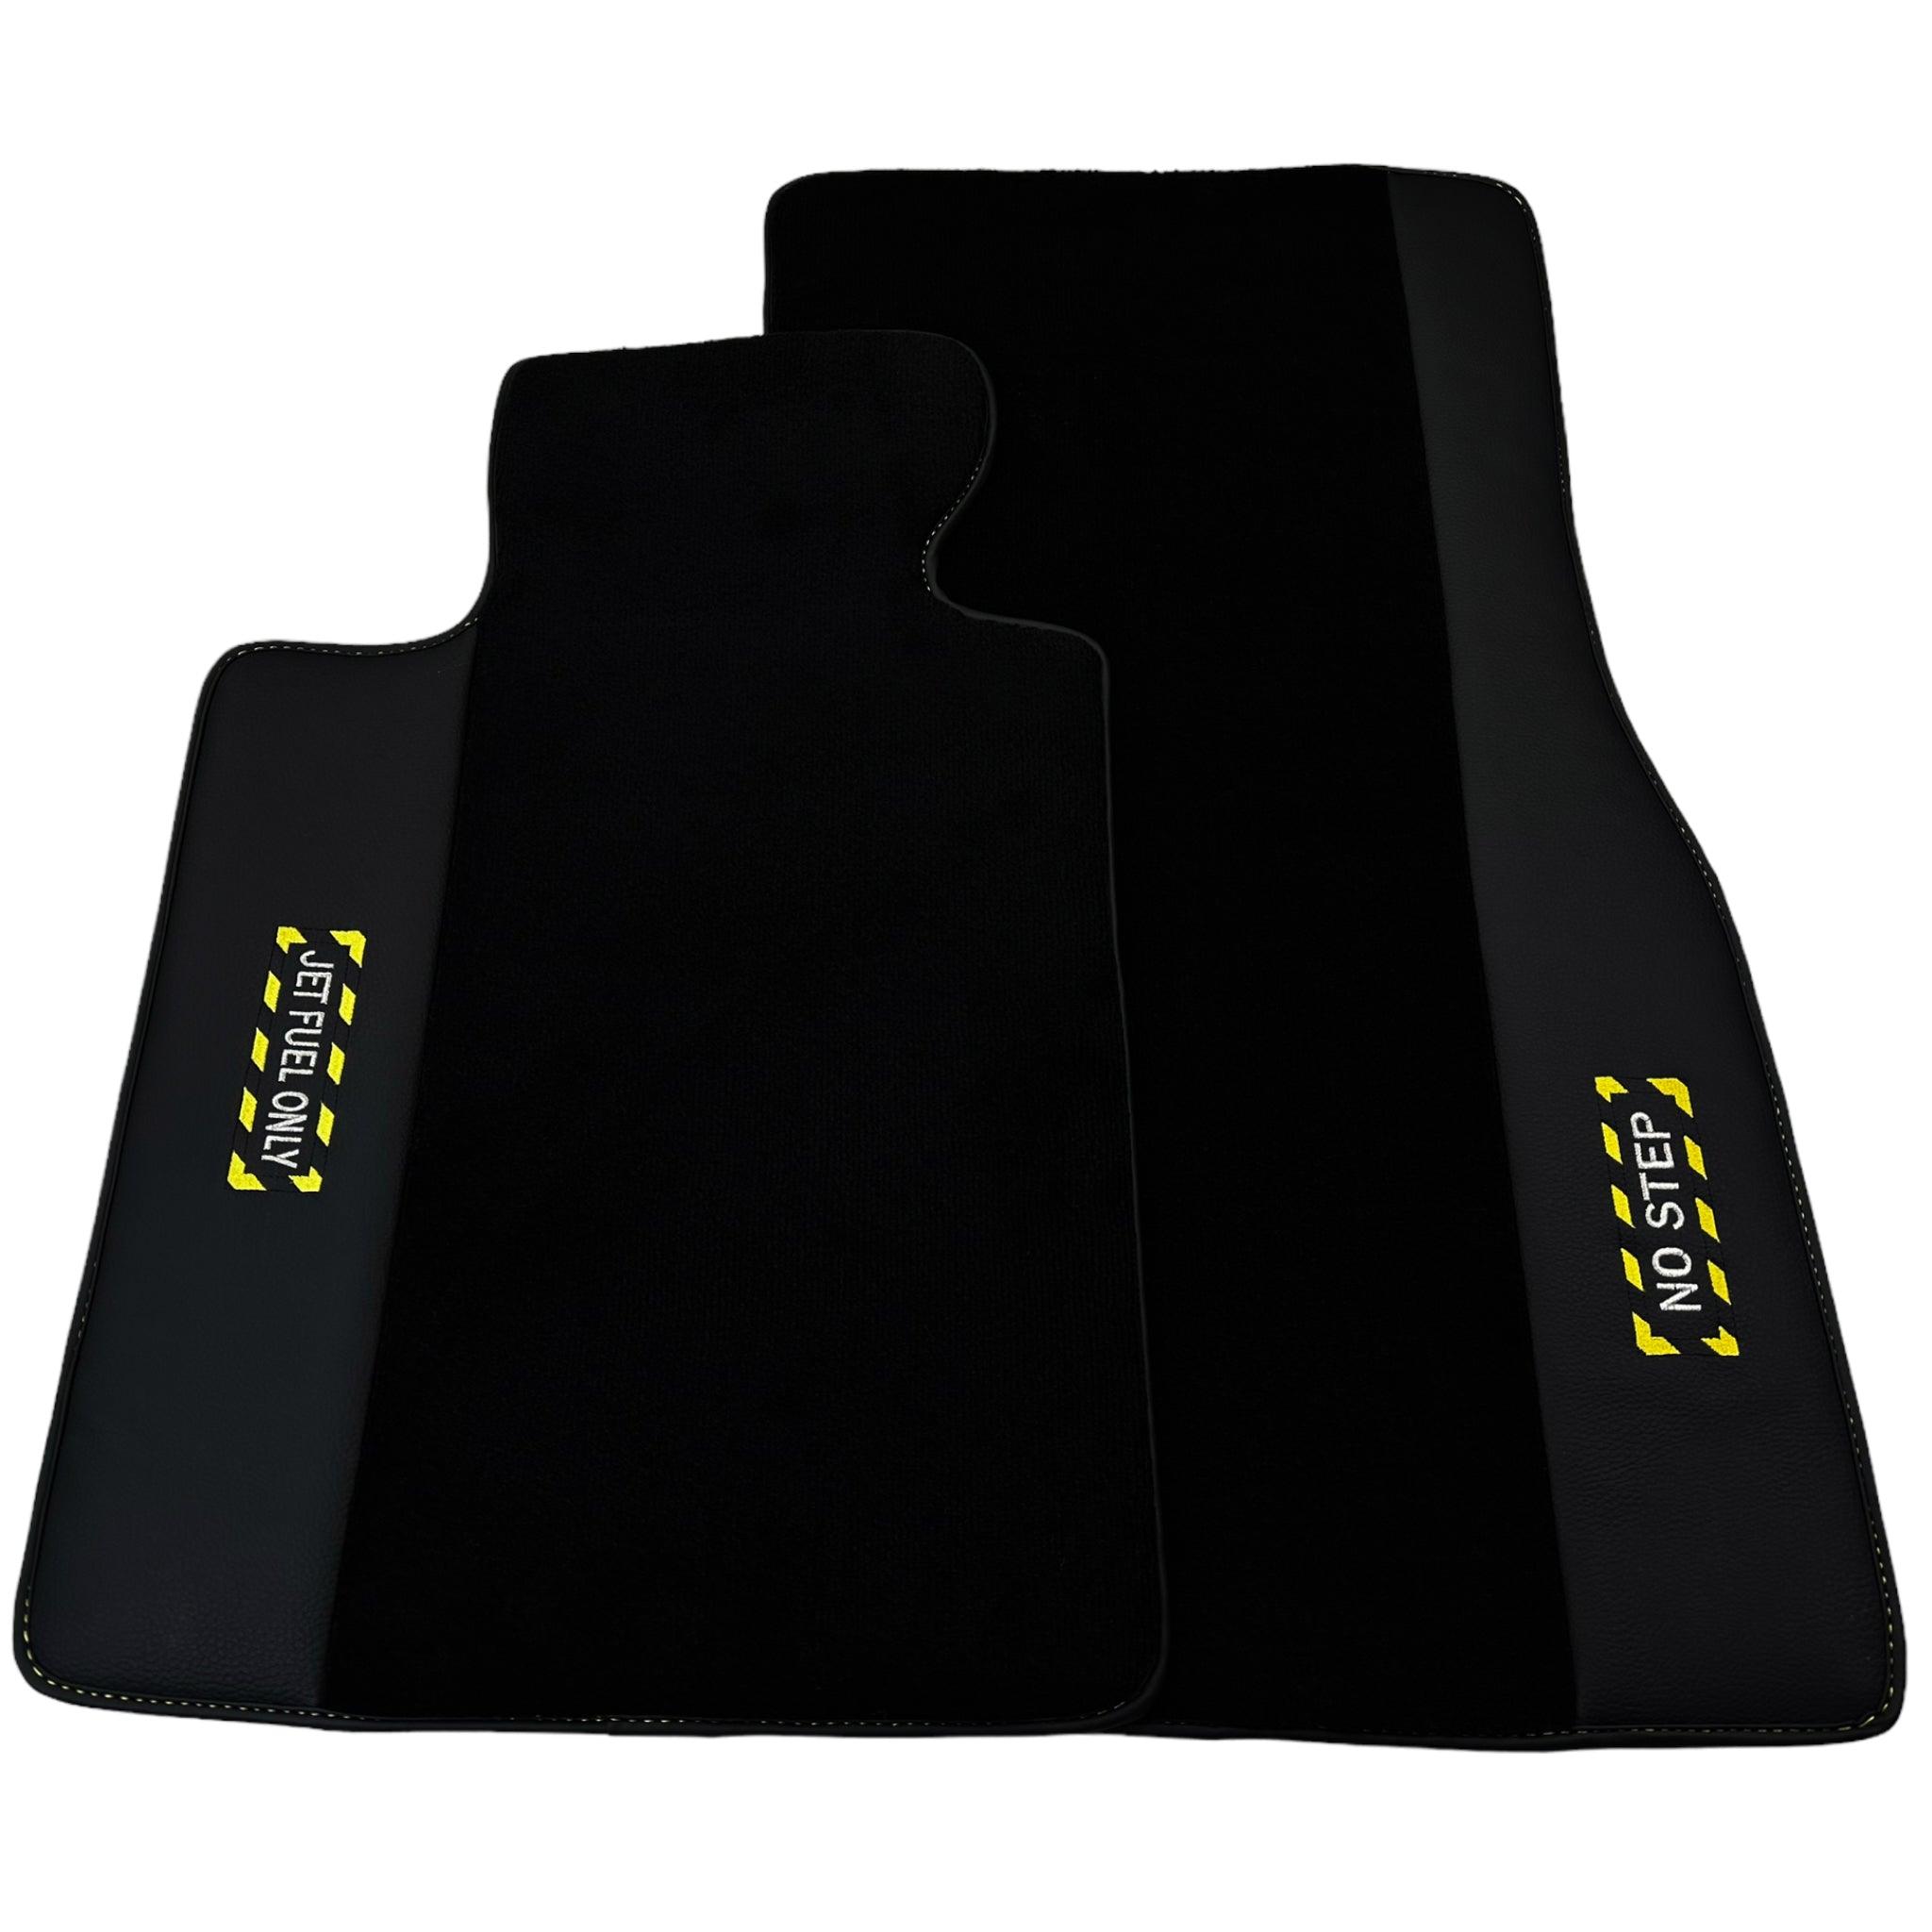 Black Floor Mats For BMW 3 Series E36 Convertible | Fighter Jet Edition - AutoWin